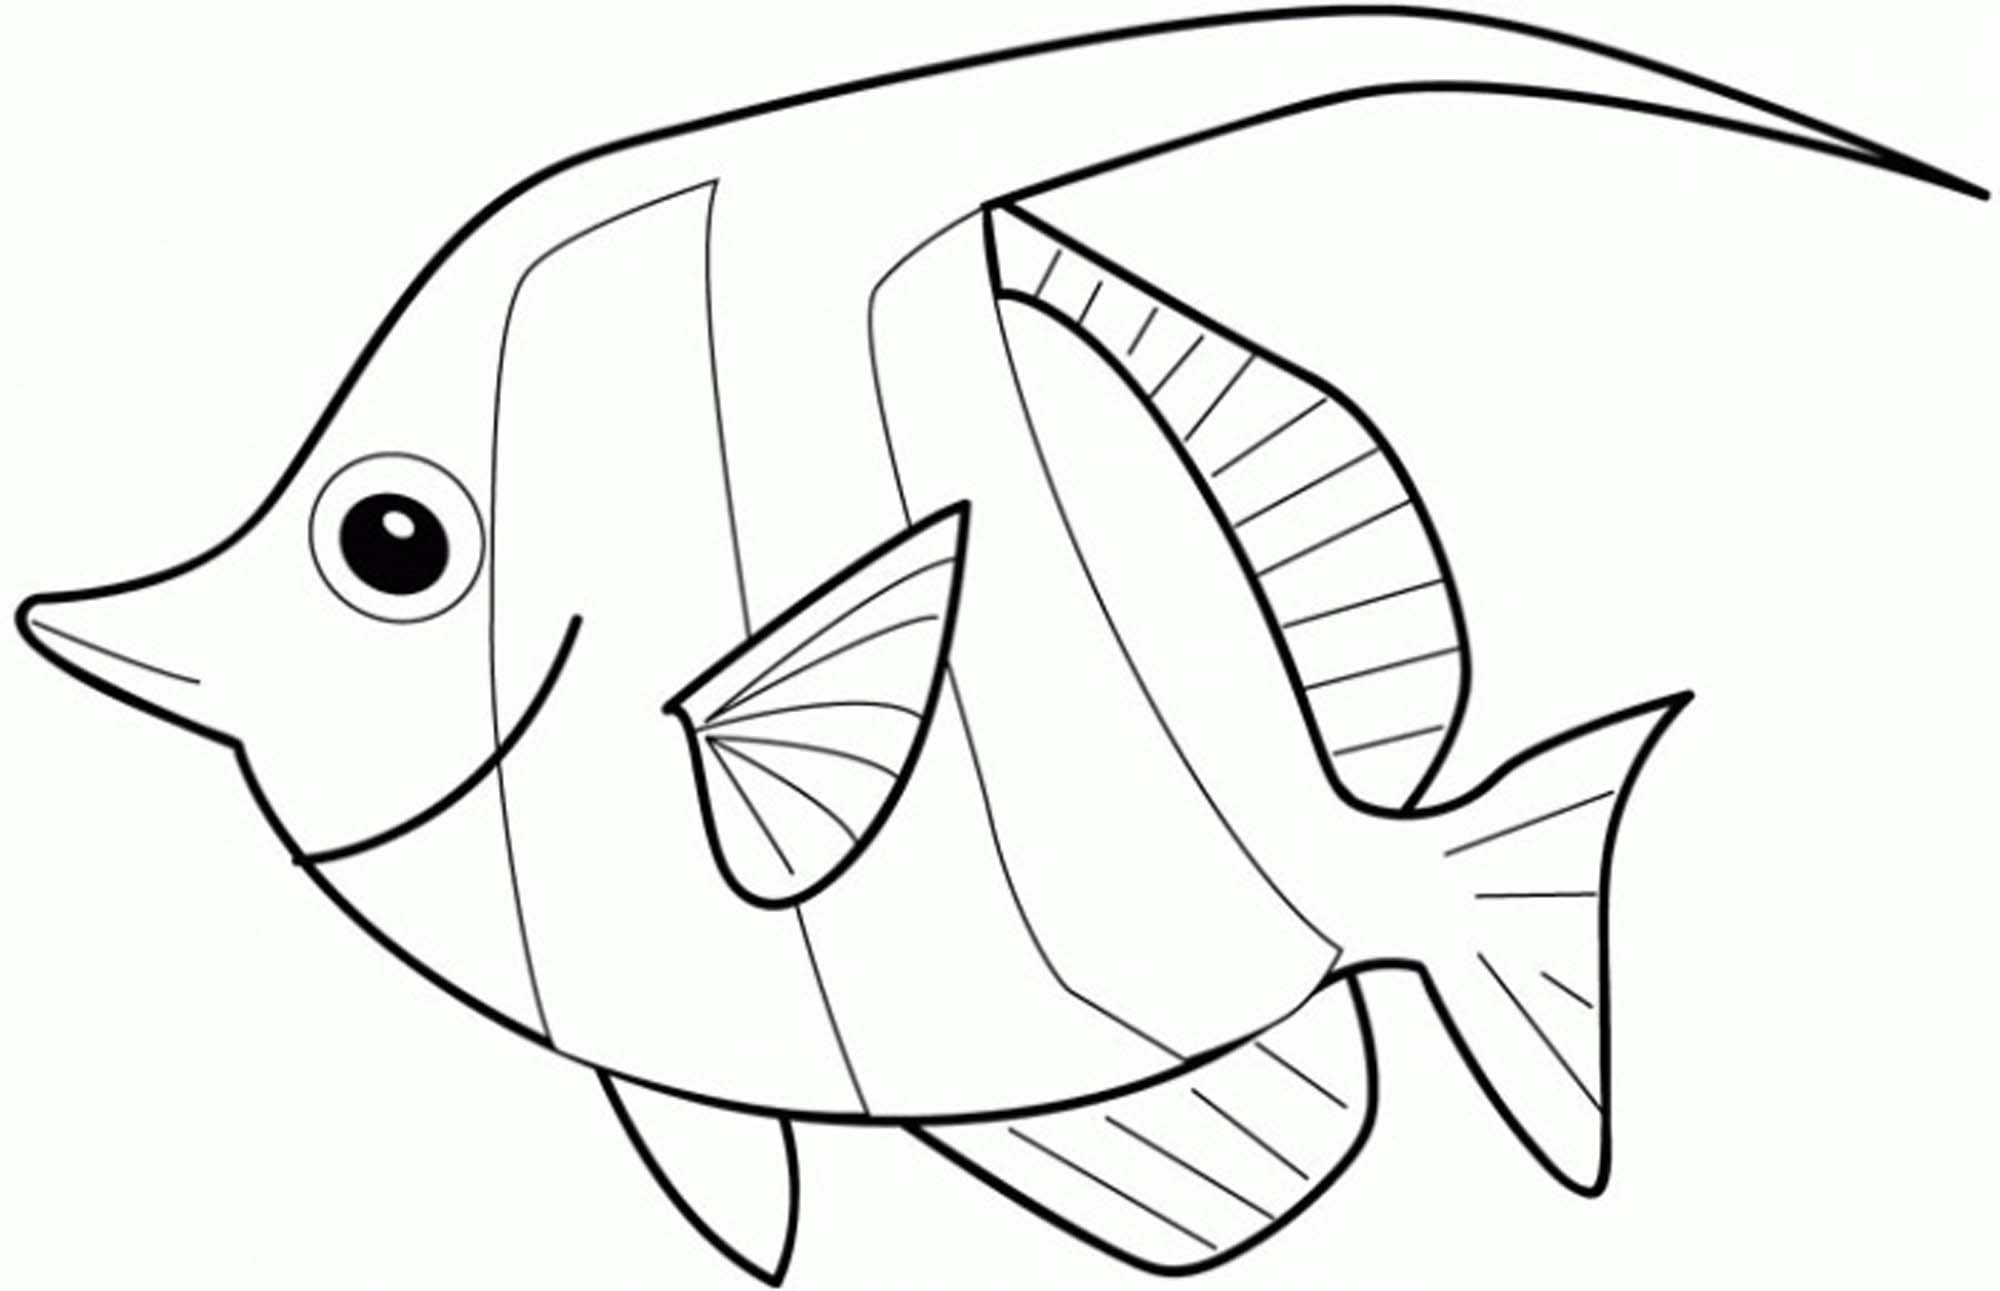 rainbow-fish-coloring-page | | BestAppsForKids.com